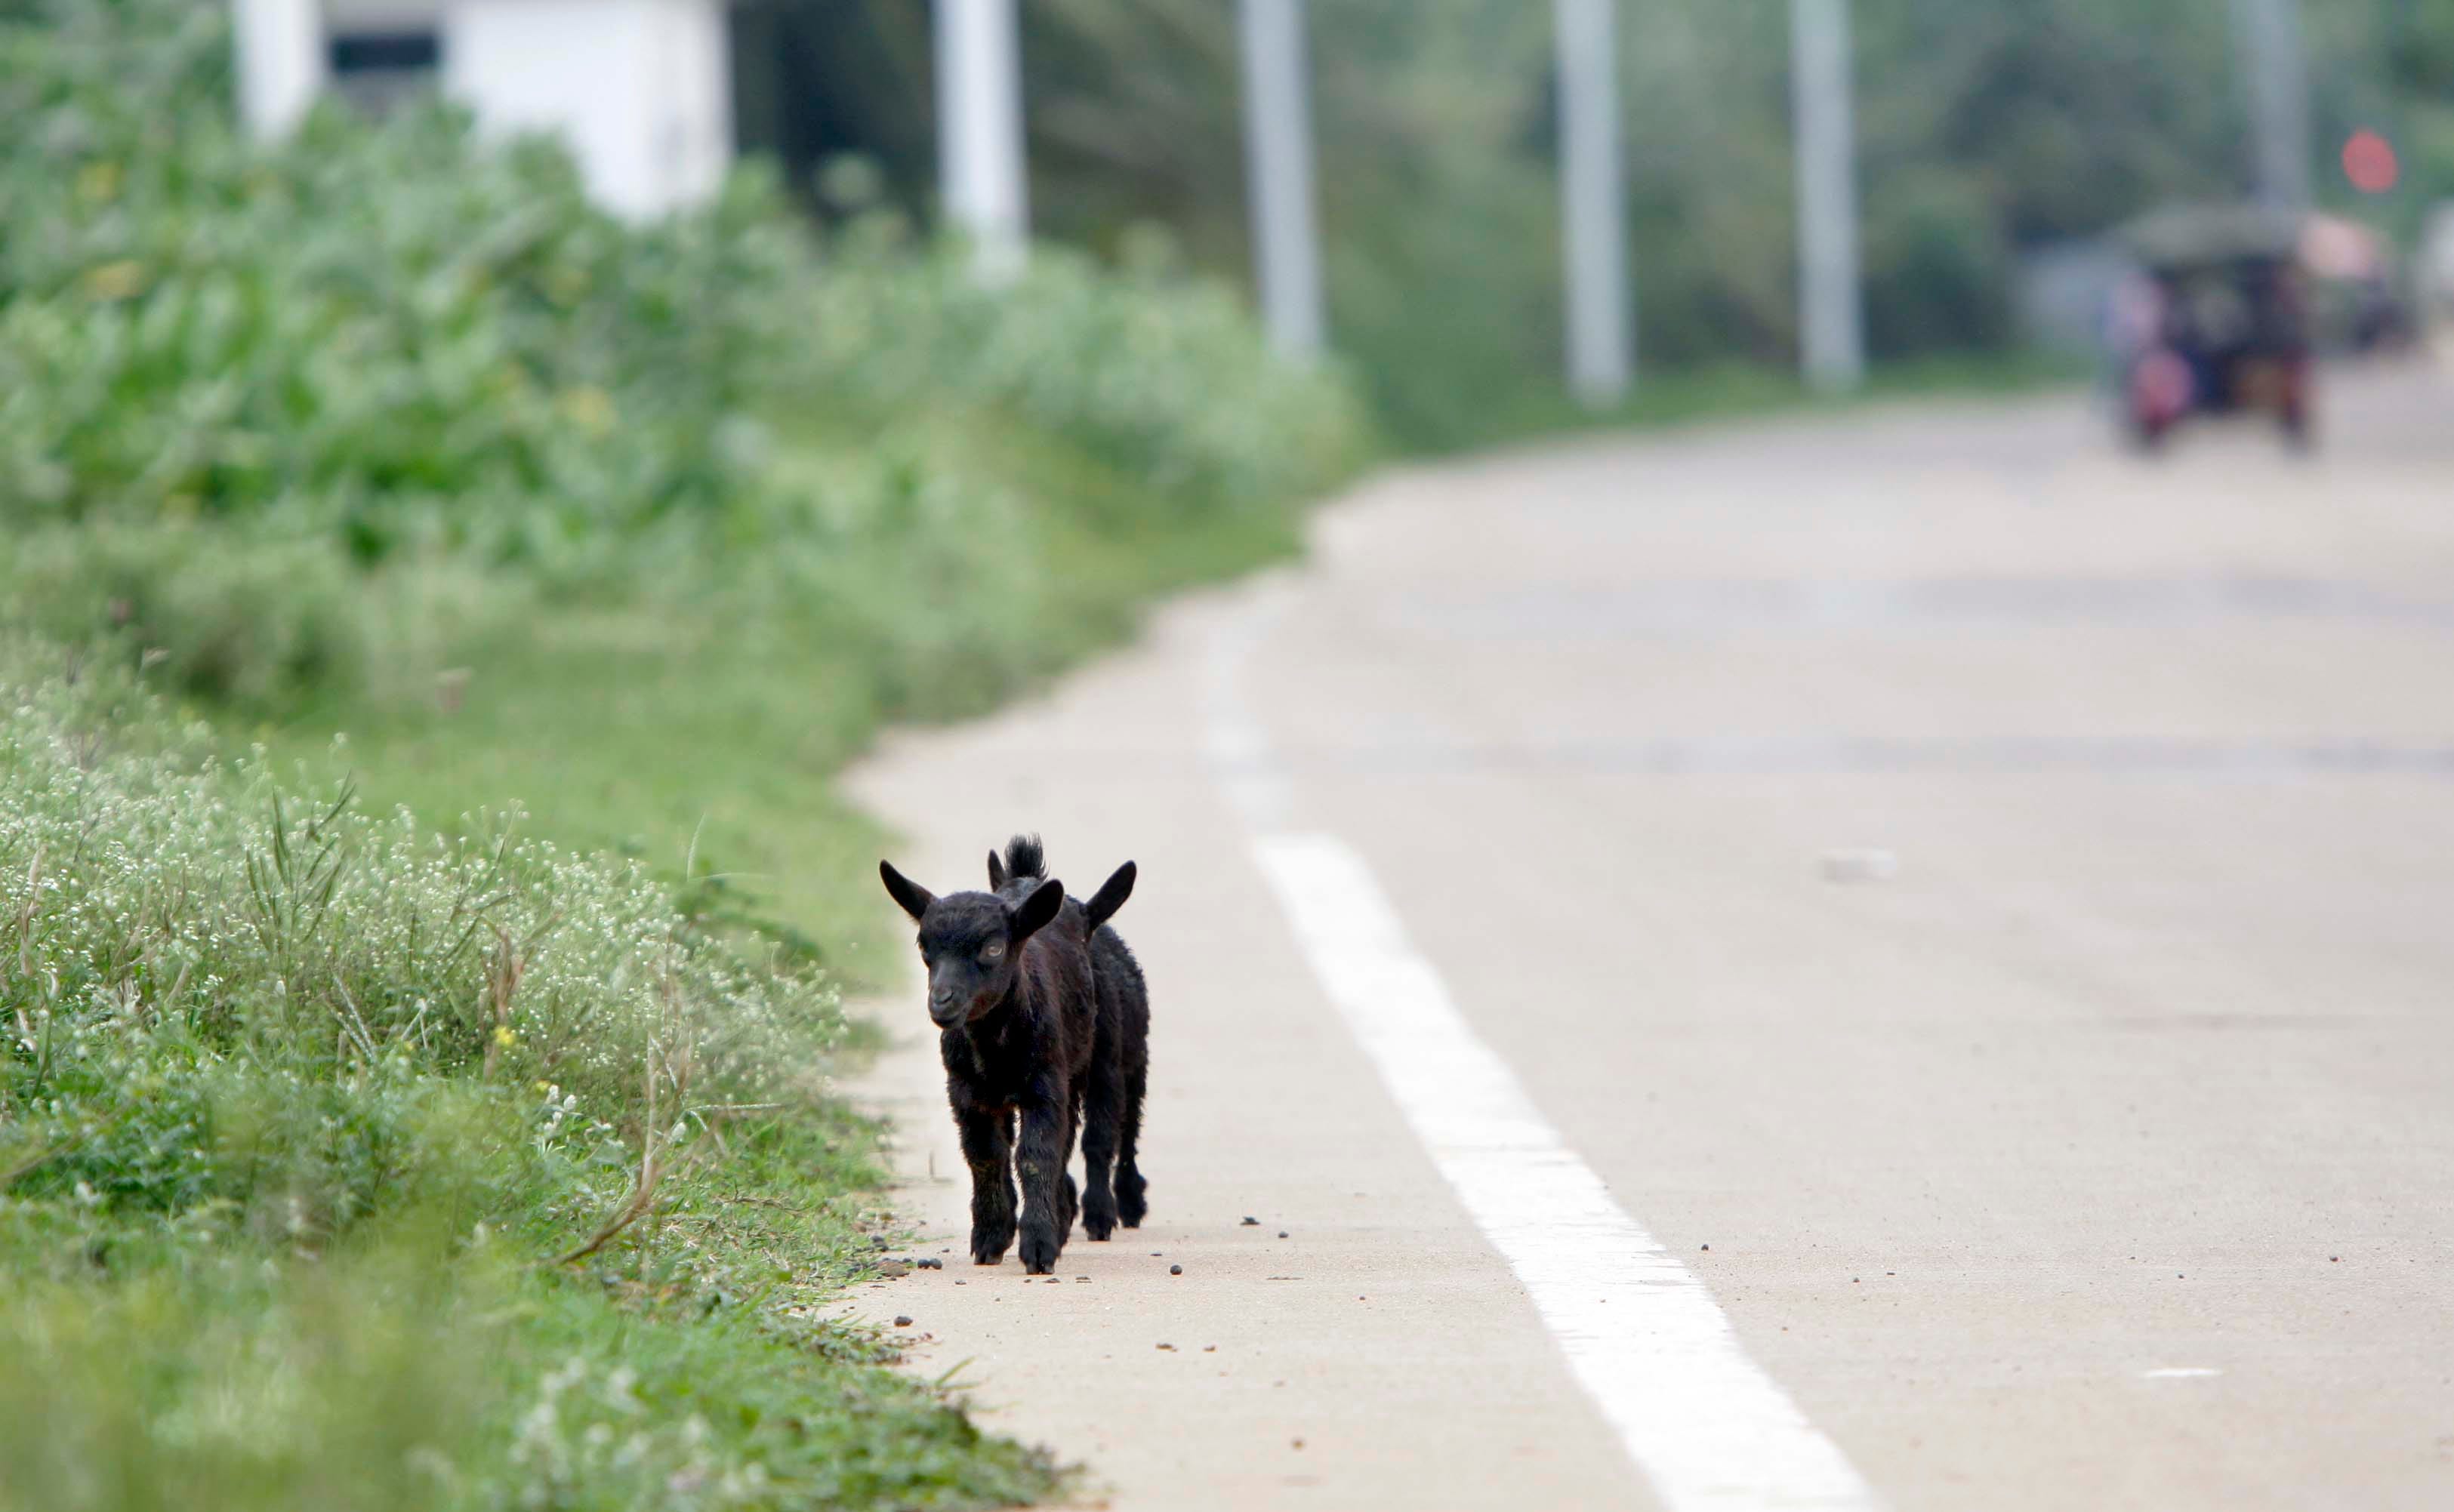 Paper Pixel  - China - Mill  - Baby goats (kids) walk down the side of the road near the APP's (Asia Pulp and Paper)  Hainan pulp and paper mill shipping port in Yangpu on the northern side of Hainan in the  Yangpu Economic Development Zone in China. Residential areas are located near the mill that house many of the mill workers. - September 13, 2012  - Photo by Mike De Sisti / MDESISTI@JOURNALSENTINEL.COM